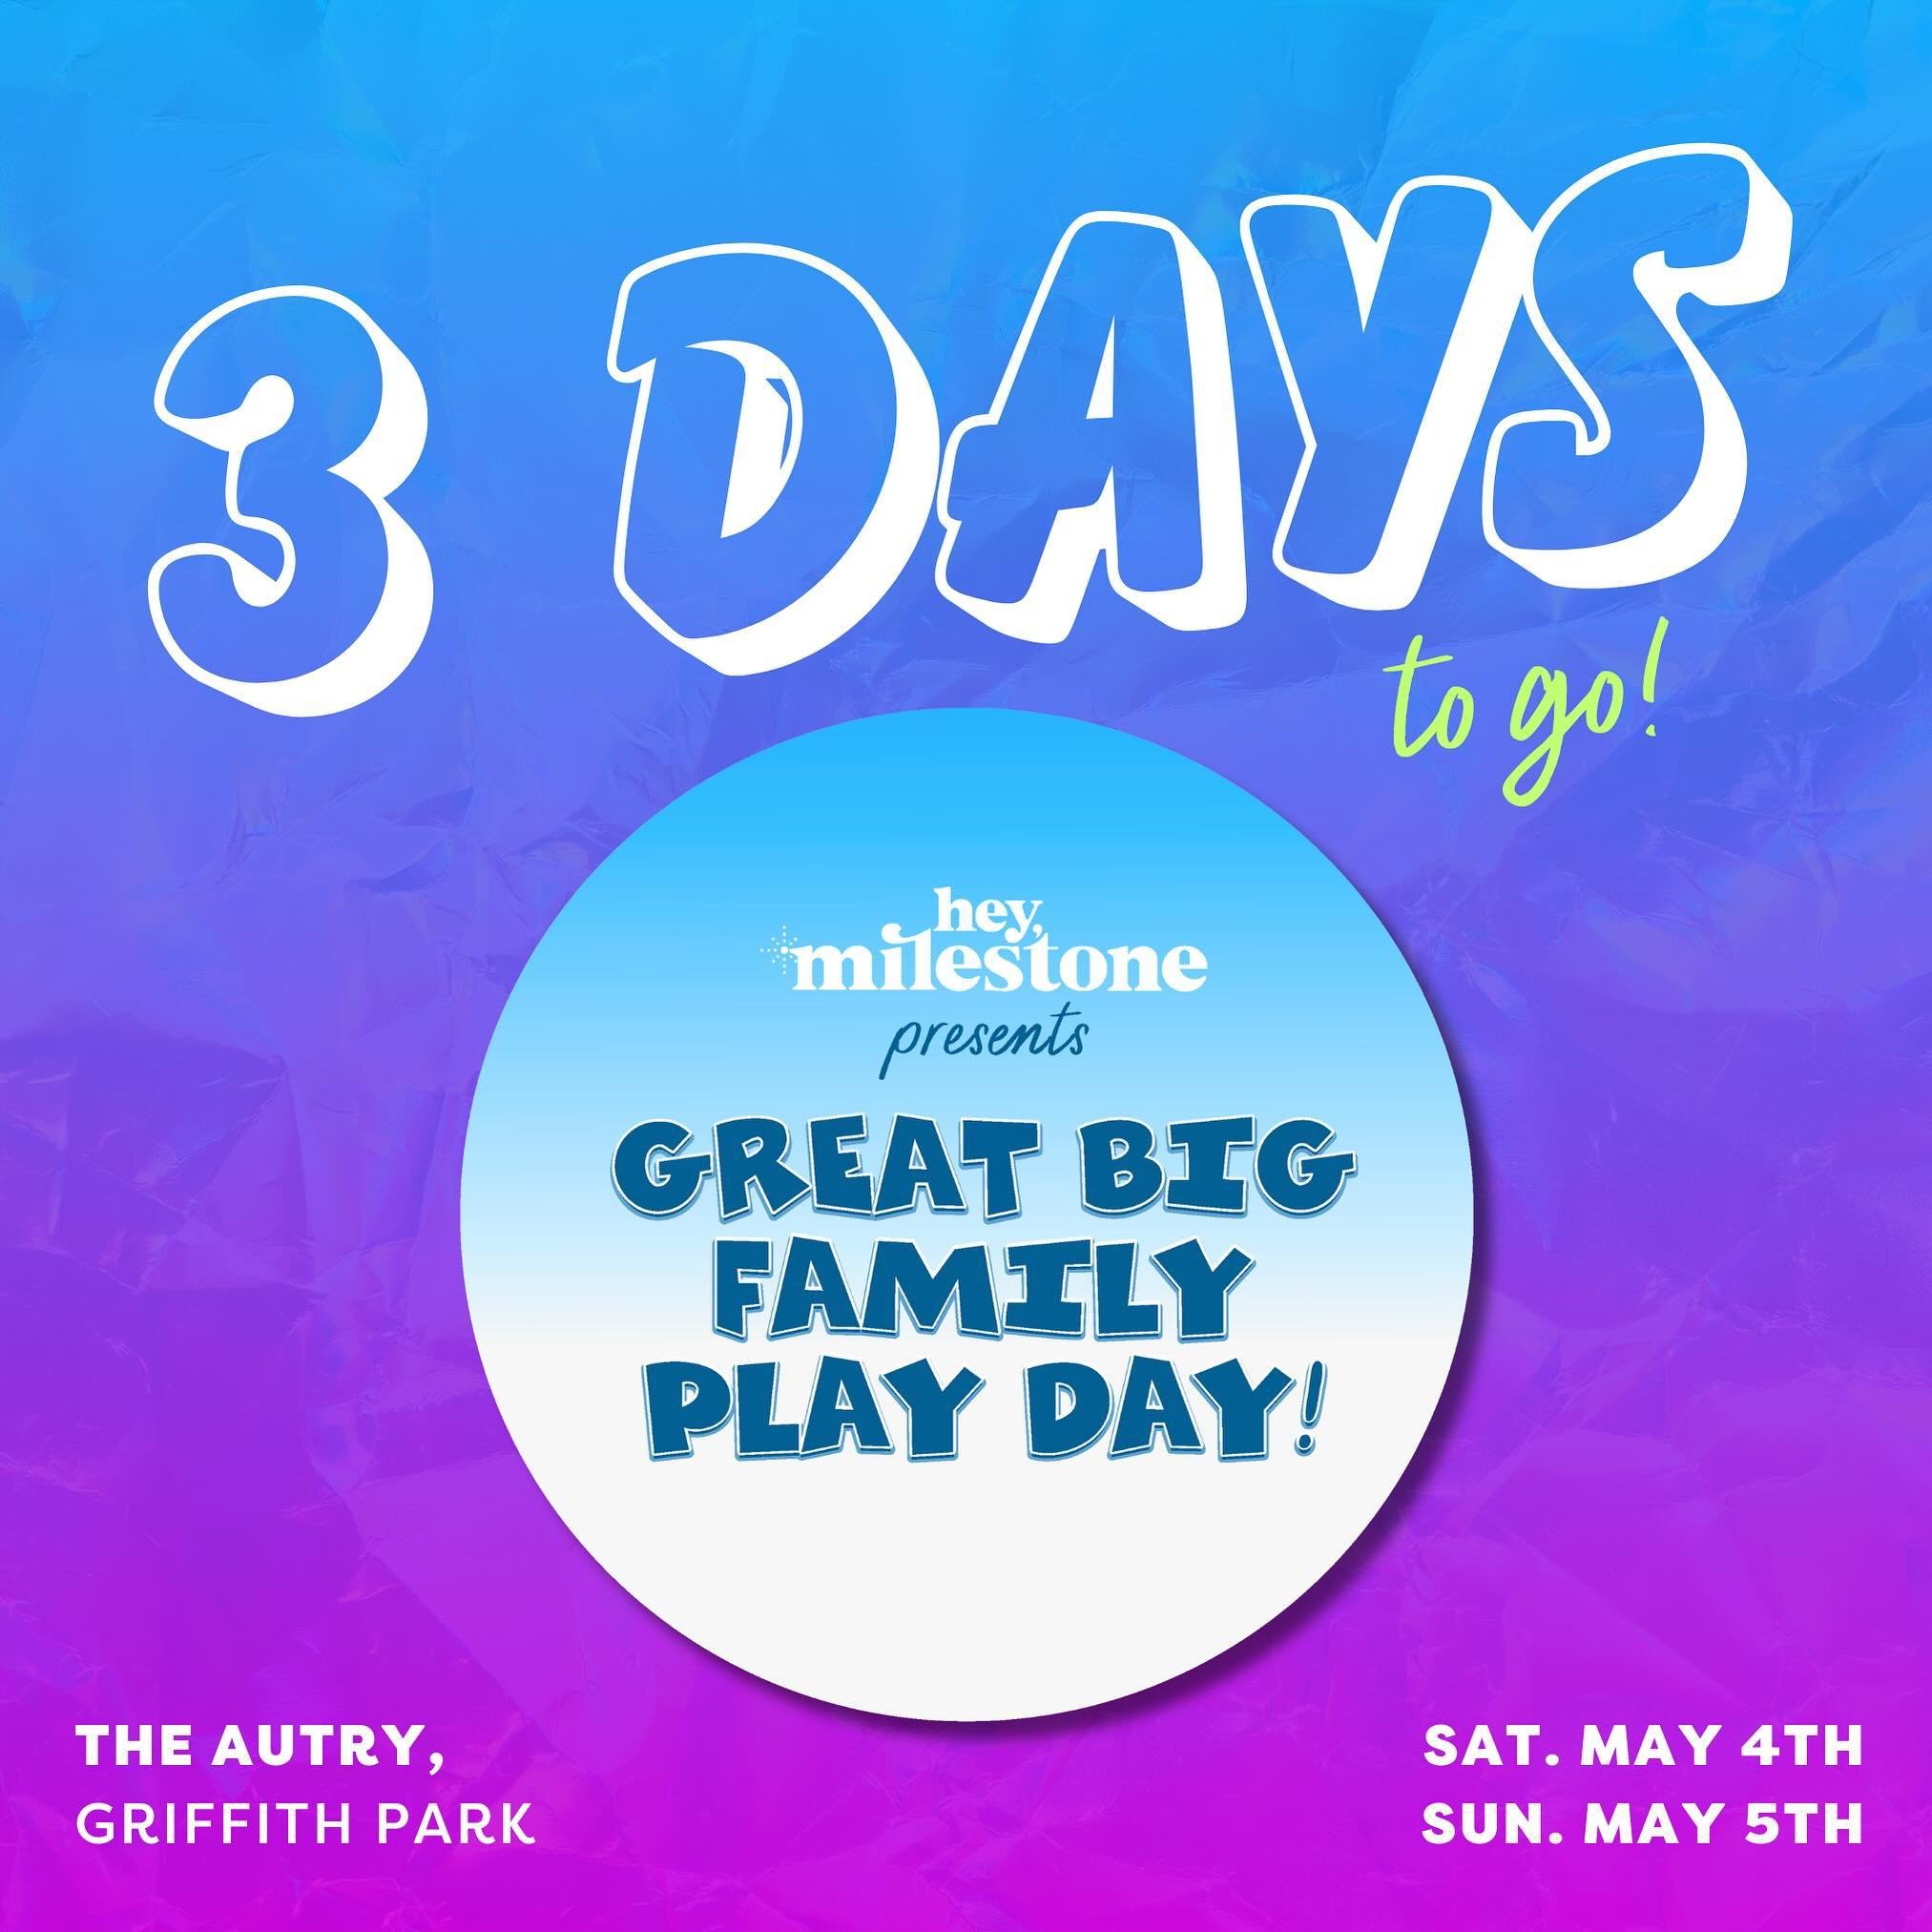 Don&rsquo;t miss our Early Access hours each morning @greatbigfamilyplayday! 

Come early for easy parking, speedy check in and special gifting from our partners at @dollopbabe &amp; @everedenbrand who are gifting our first attendees through the gate